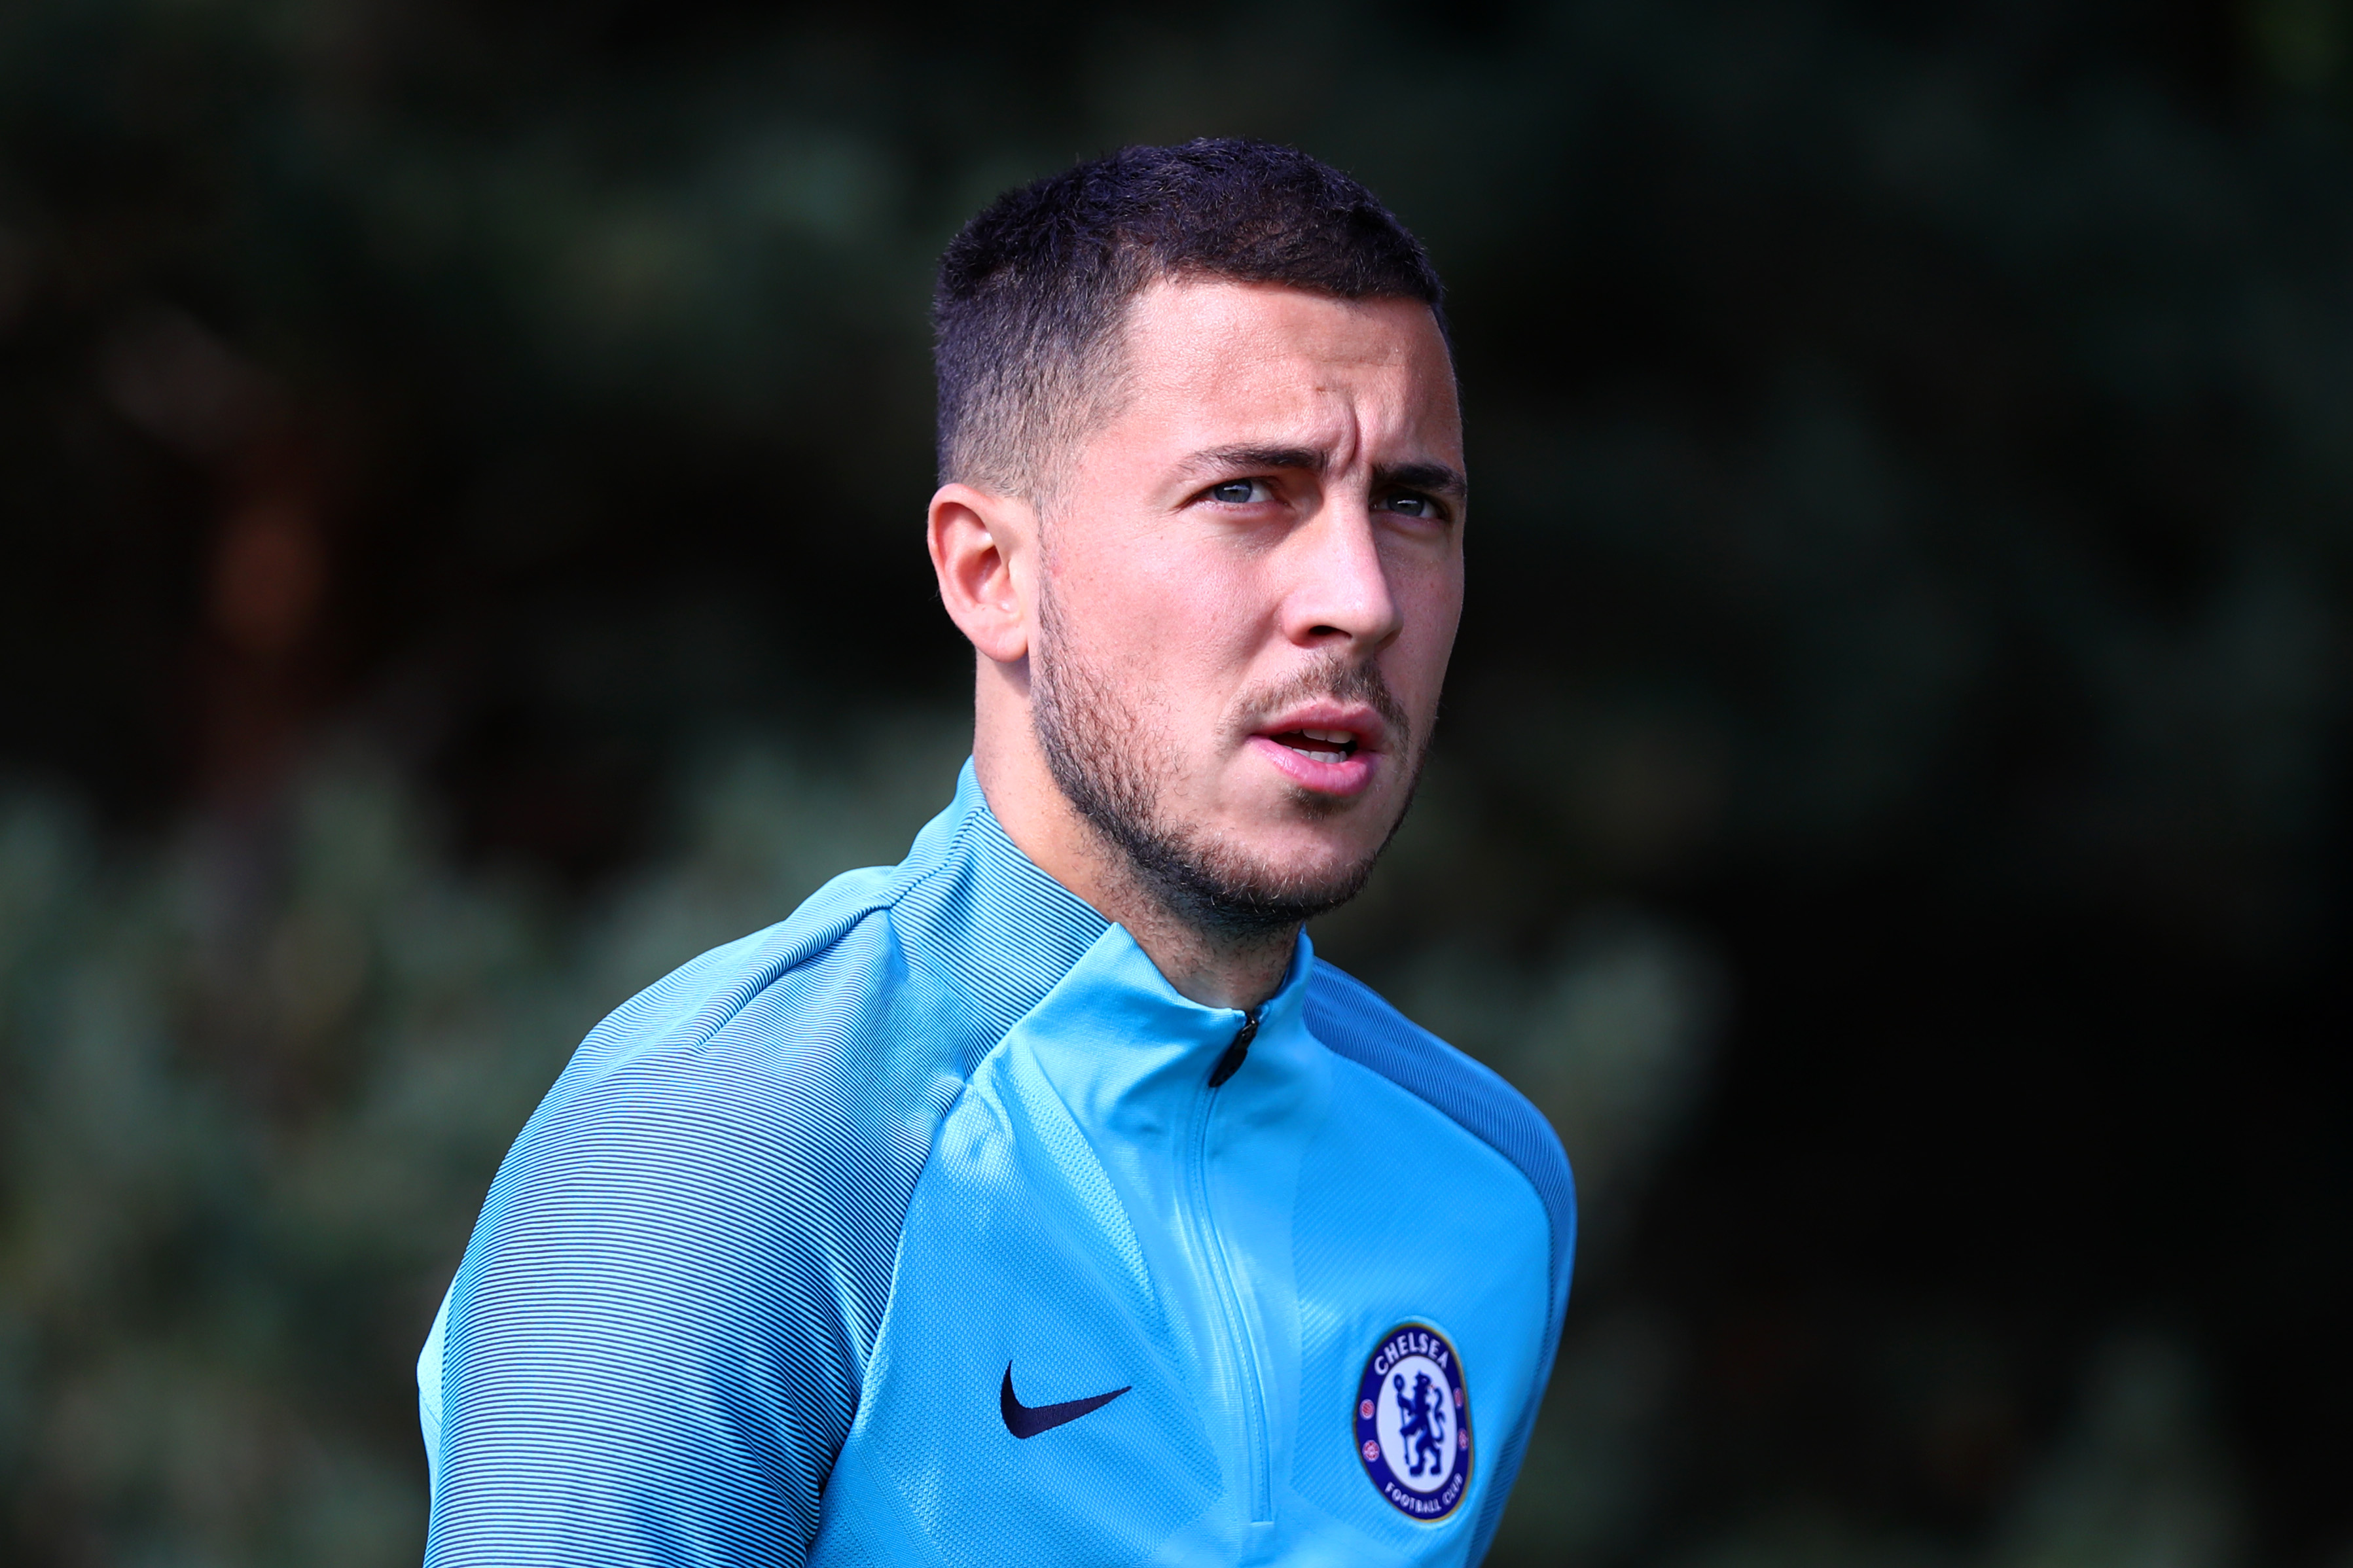 Thing are looking up for Eden Hazard (Photo by Dan Istitene/Getty Images)